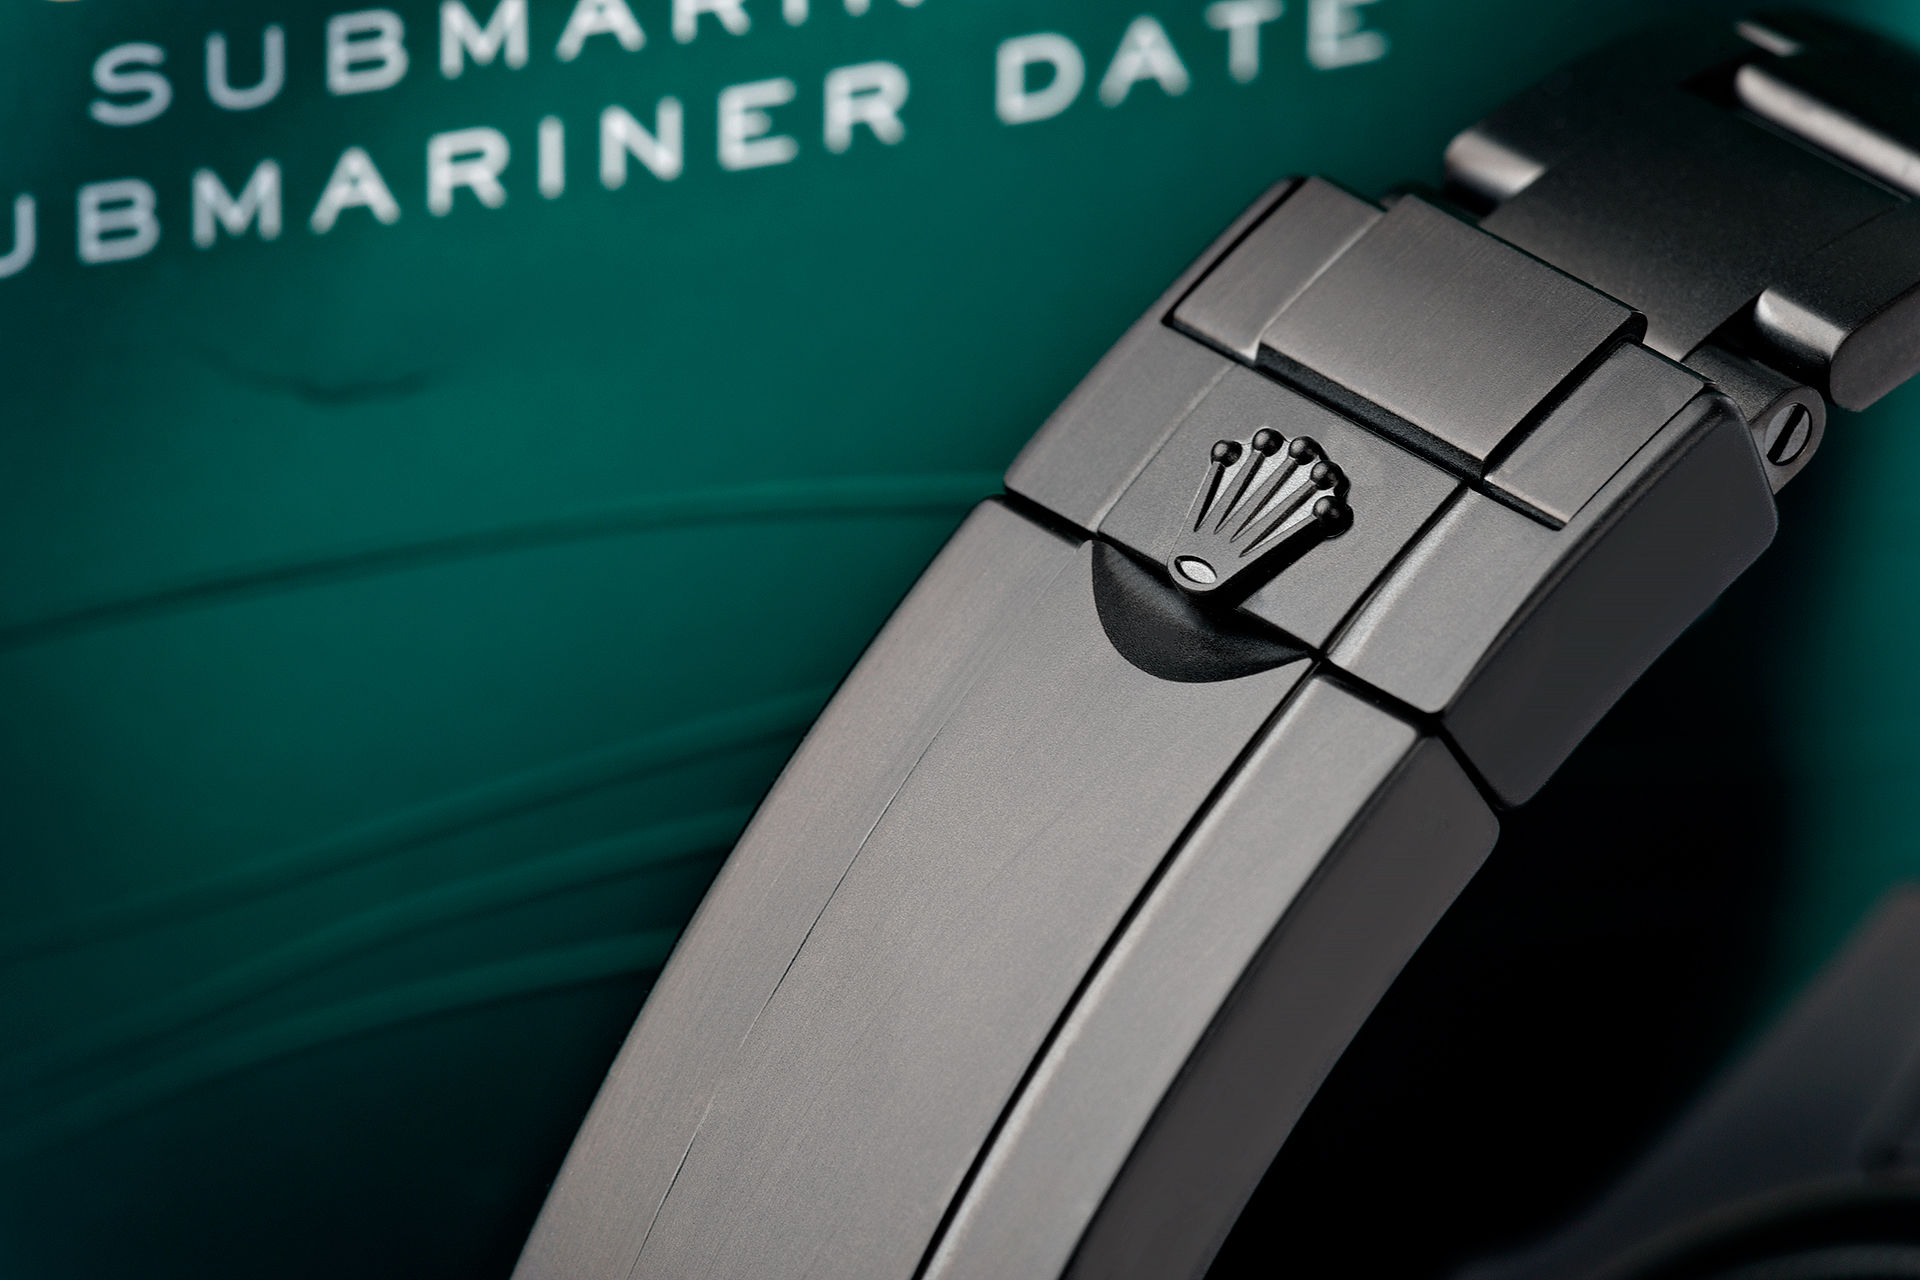 ref 114060 | 'Military' 1 of 100 Limited Edition | Pro Hunter Submariner